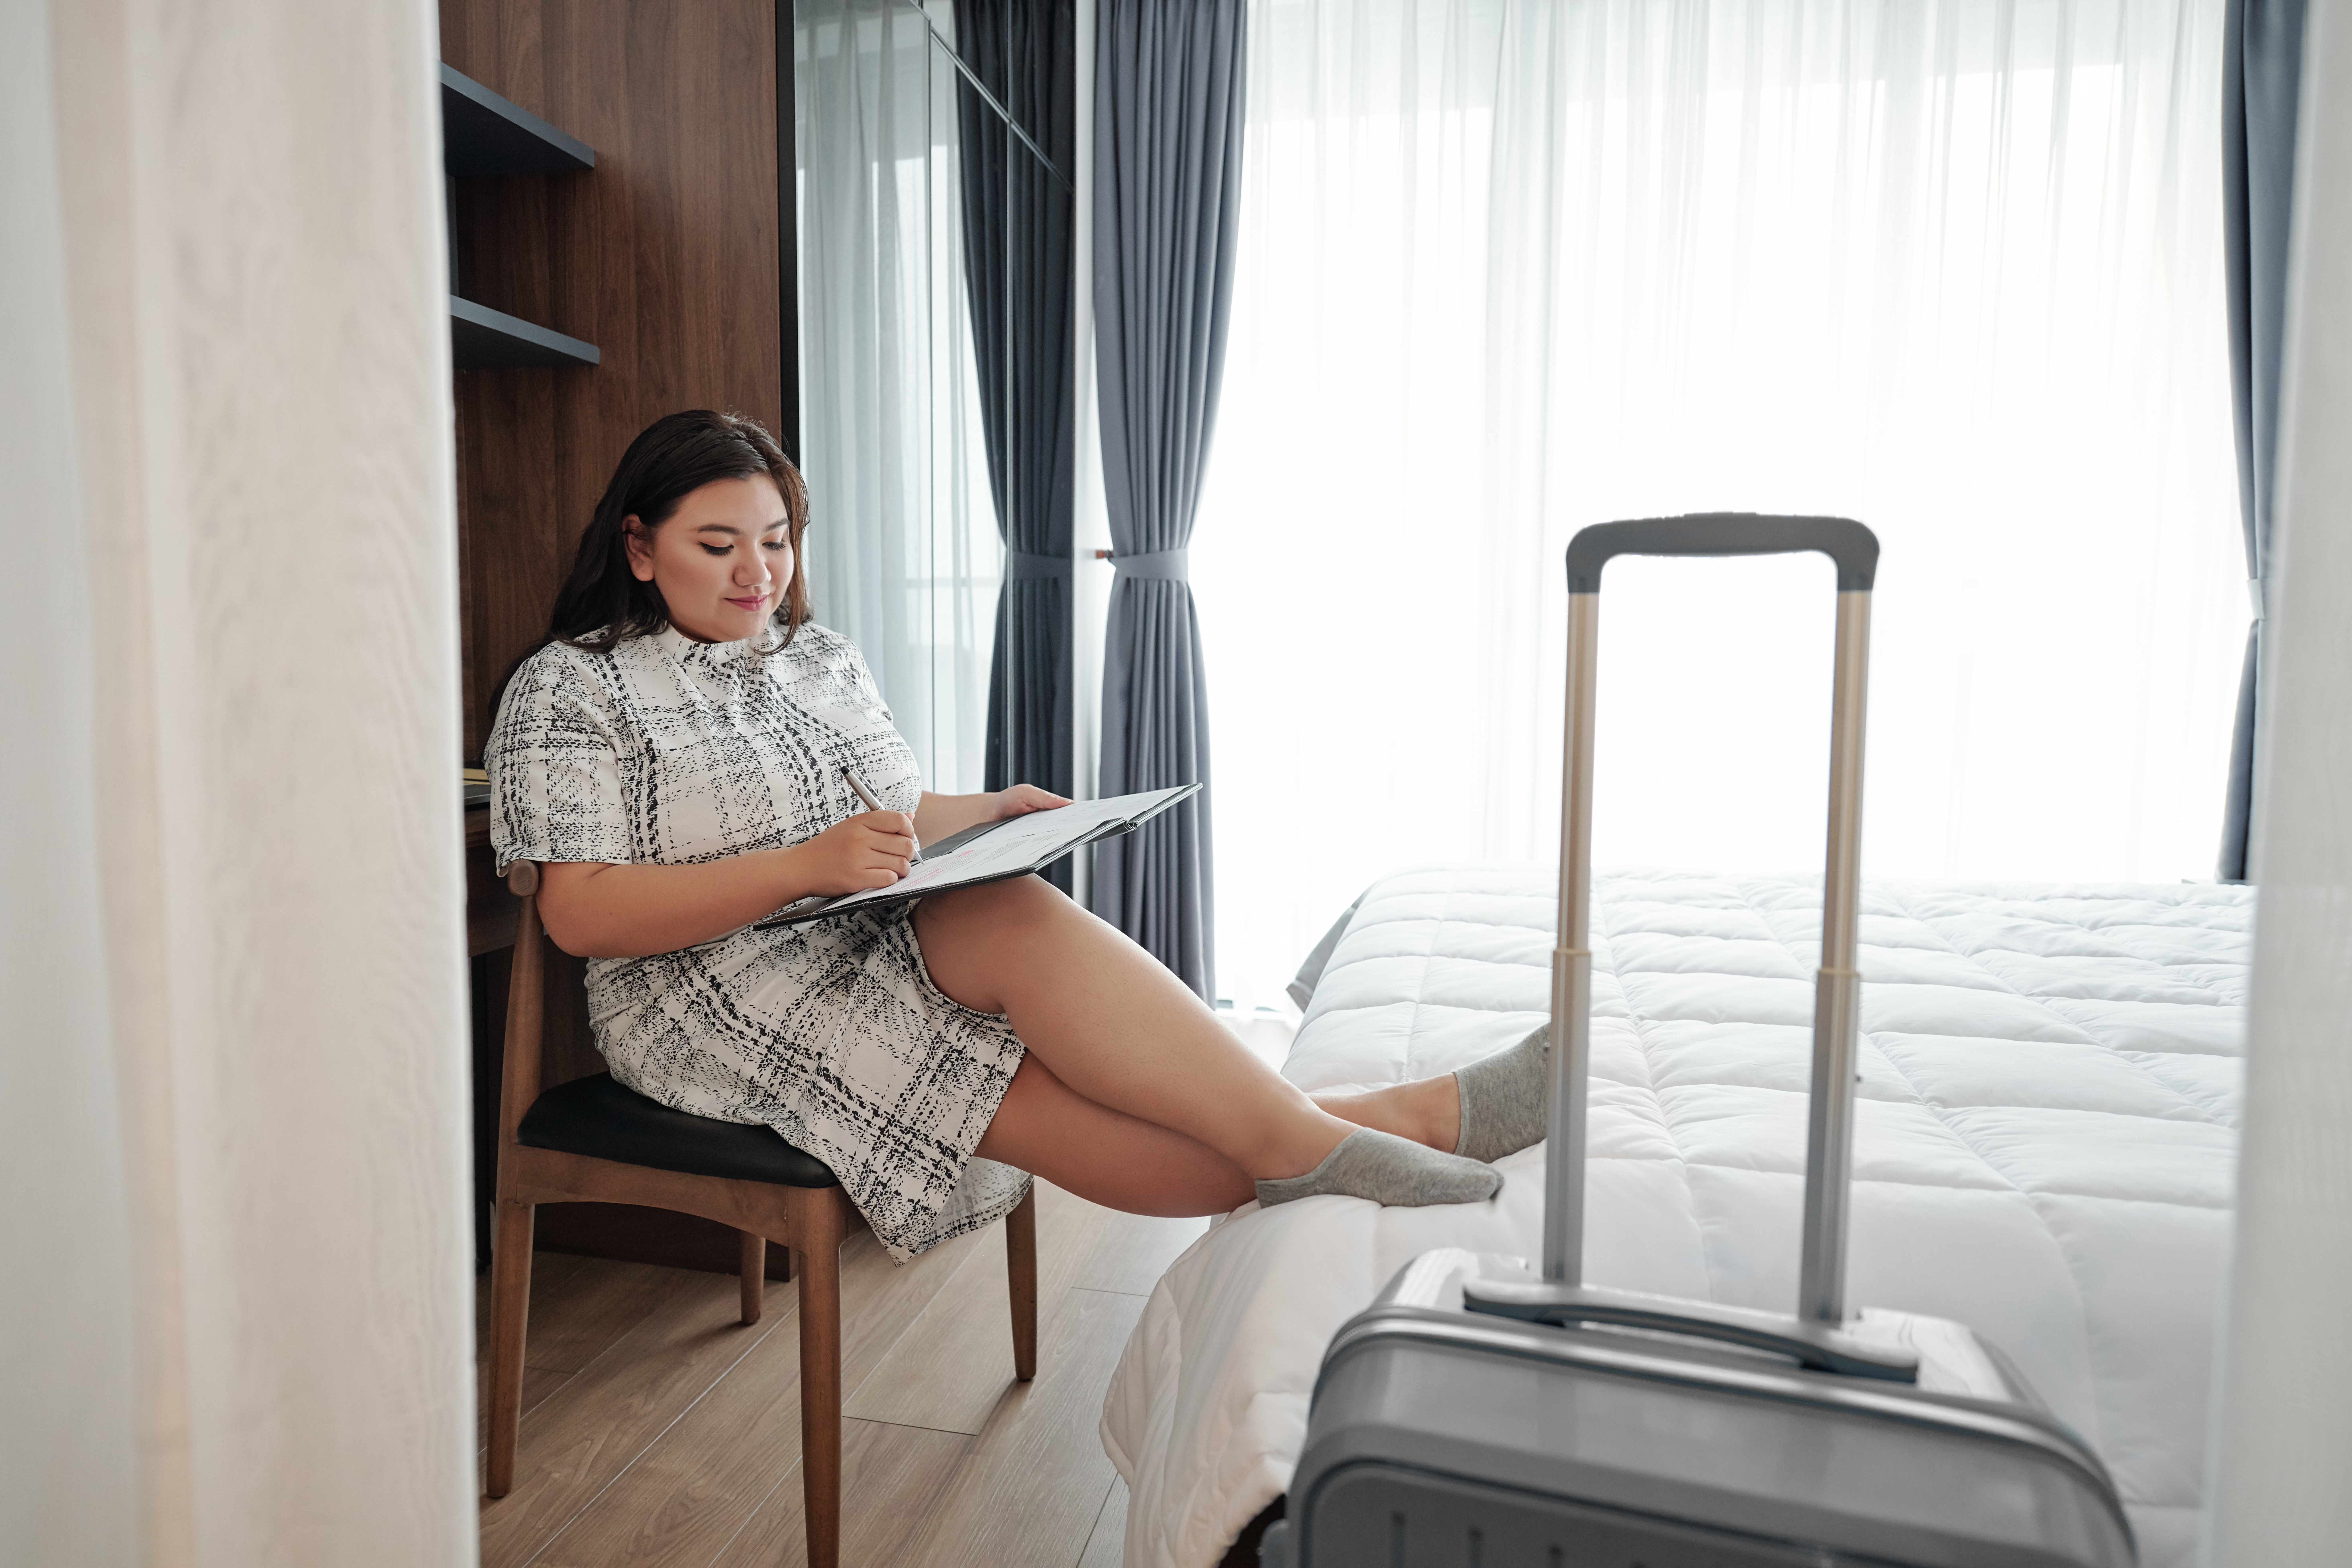 How to use your hotel's reviews to make an impact with a limited budget